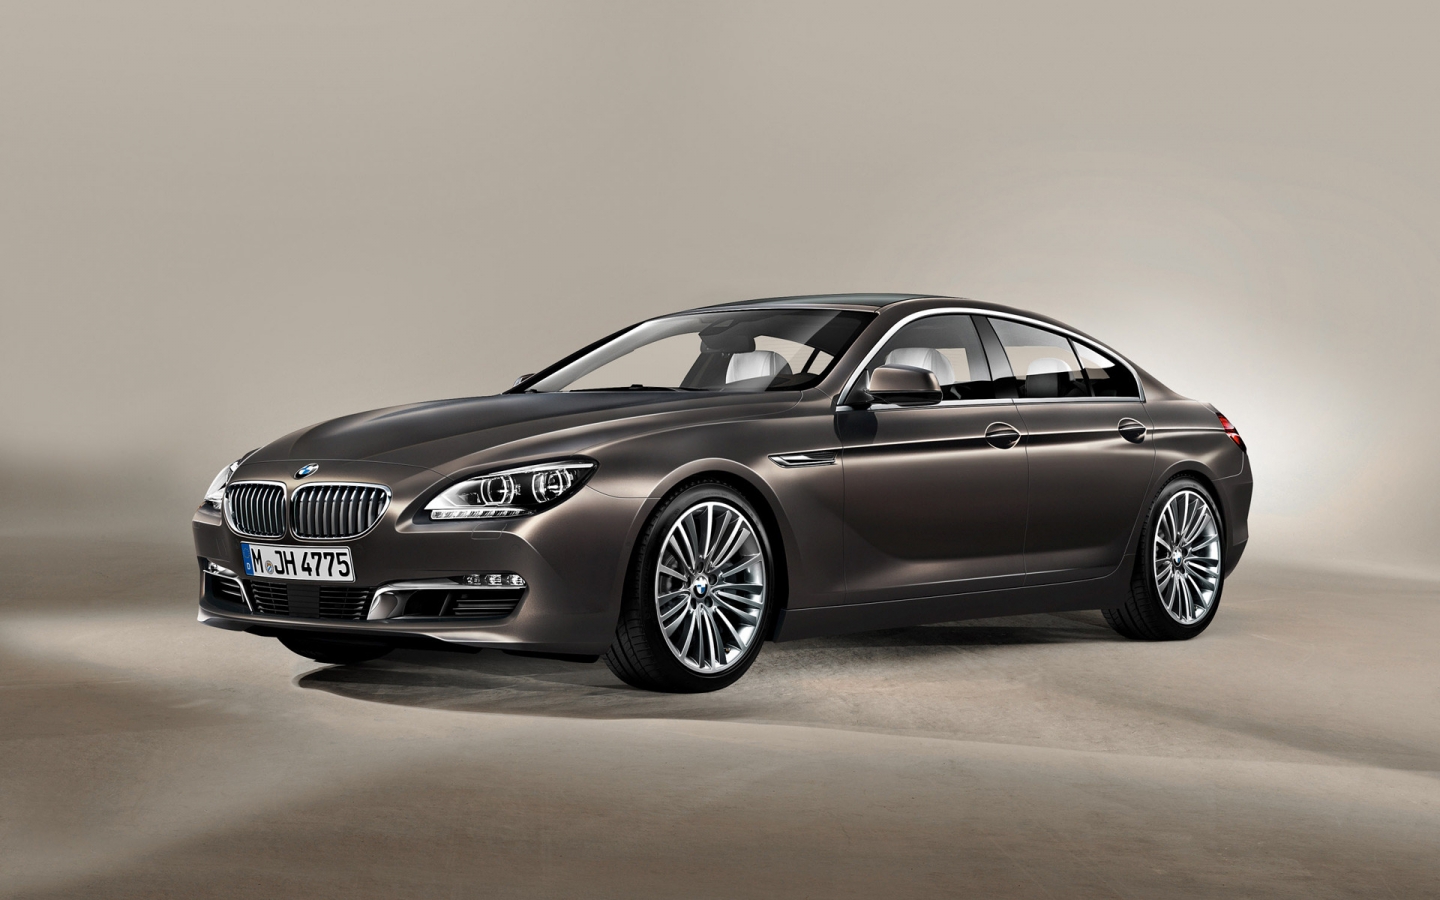 2013 BMW 6 Series Gran Coupe Studio for 1440 x 900 widescreen resolution